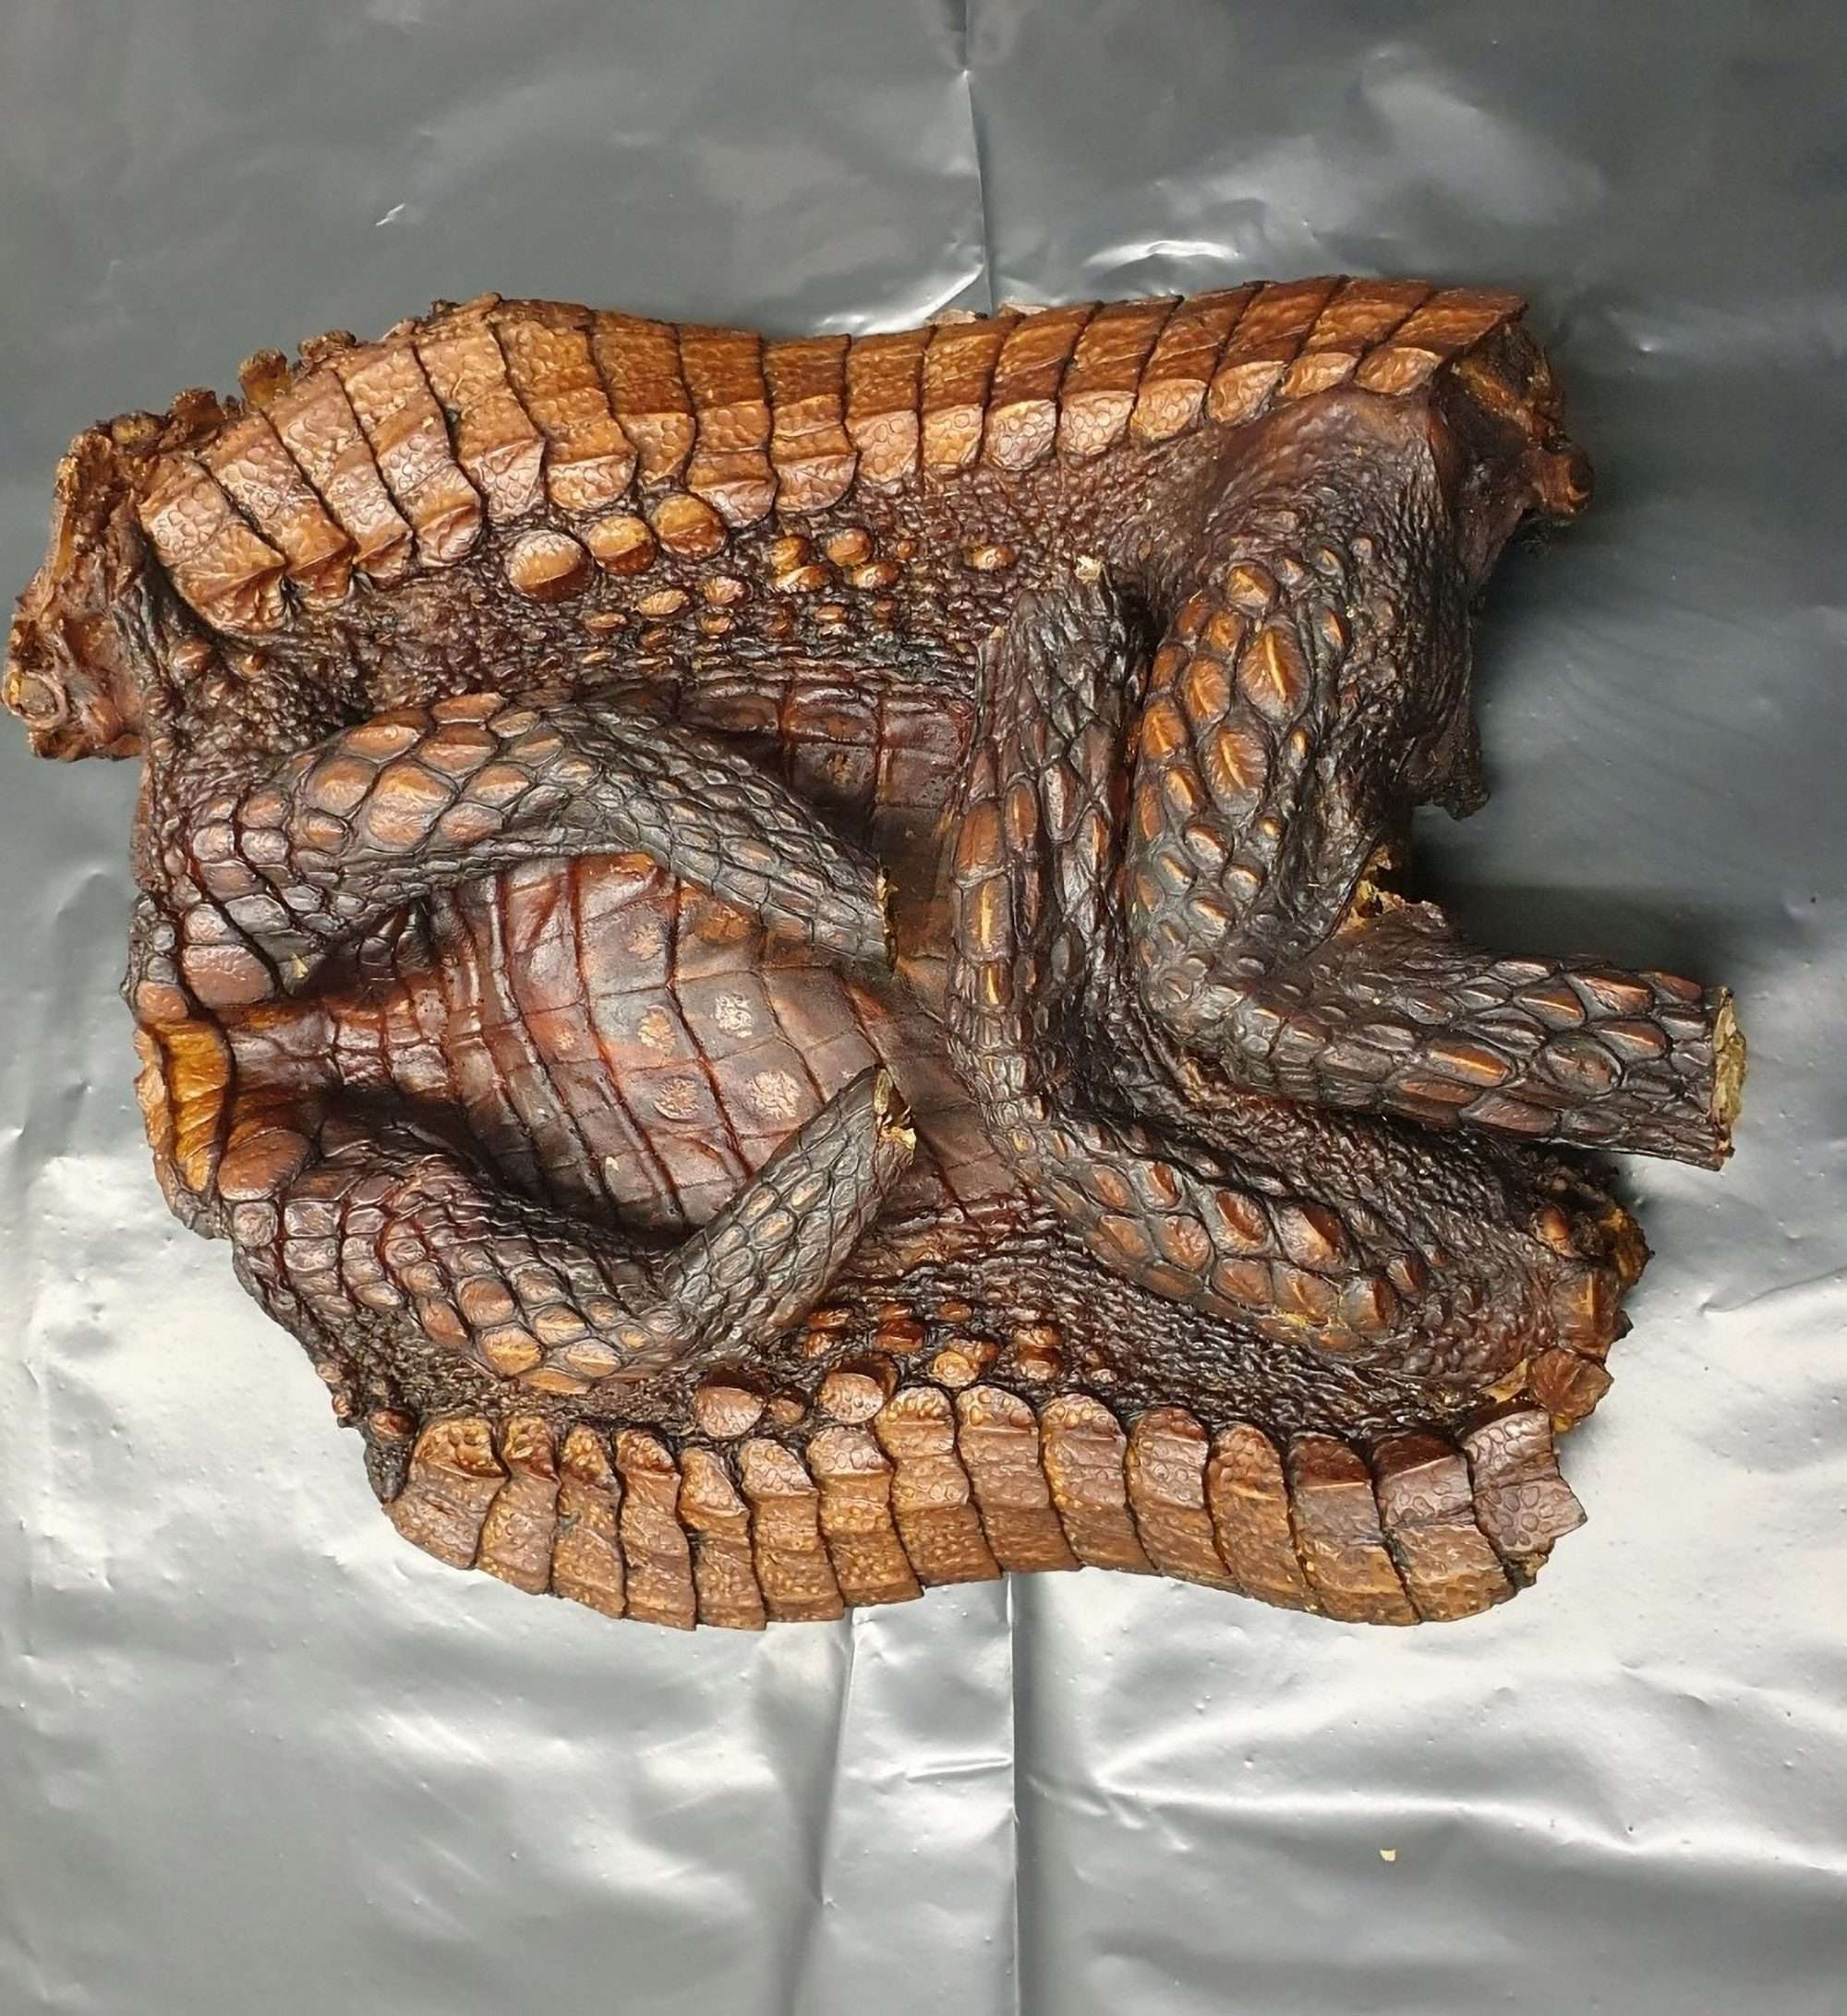 Read more about the article Hungry Flyer Caught With Smoked Snake Snack In Luggage